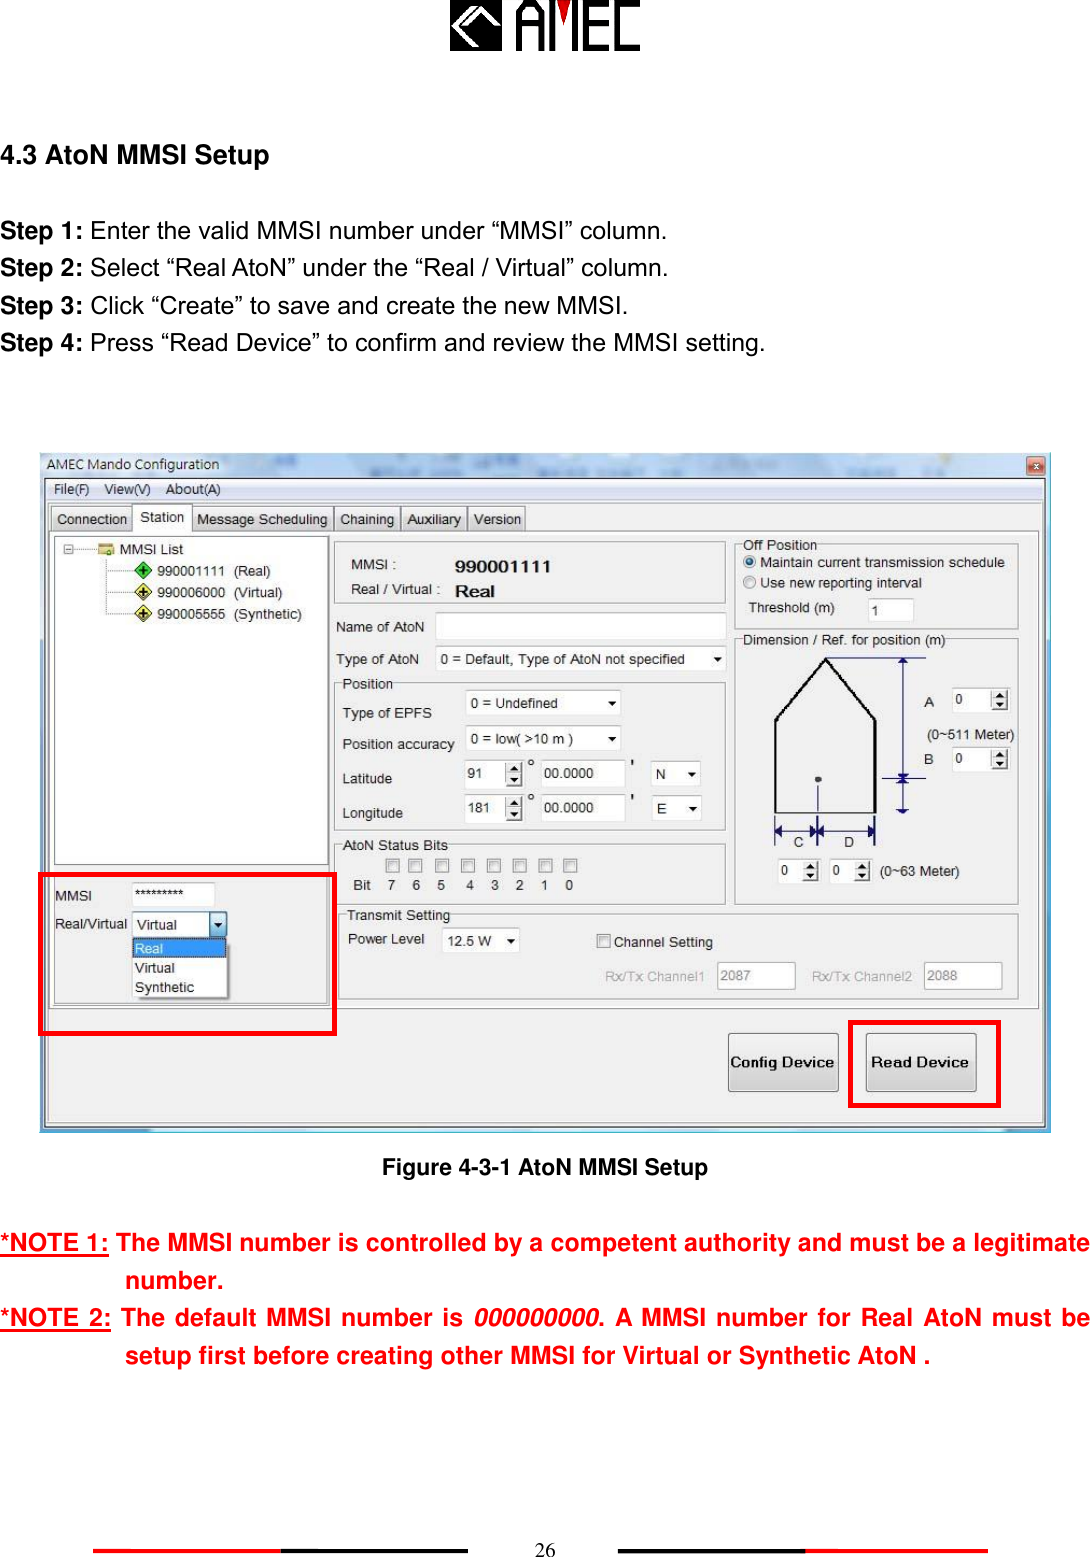    26 4.3 AtoN MMSI Setup Step 1: Enter the valid MMSI number under “MMSI” column. Step 2: Select “Real AtoN” under the “Real / Virtual” column. Step 3: Click “Create” to save and create the new MMSI. Step 4: Press “Read Device” to confirm and review the MMSI setting.    Figure 4-3-1 AtoN MMSI Setup  *NOTE 1: The MMSI number is controlled by a competent authority and must be a legitimate number. *NOTE 2: The default MMSI number is 000000000. A MMSI number for Real AtoN must be setup first before creating other MMSI for Virtual or Synthetic AtoN . 